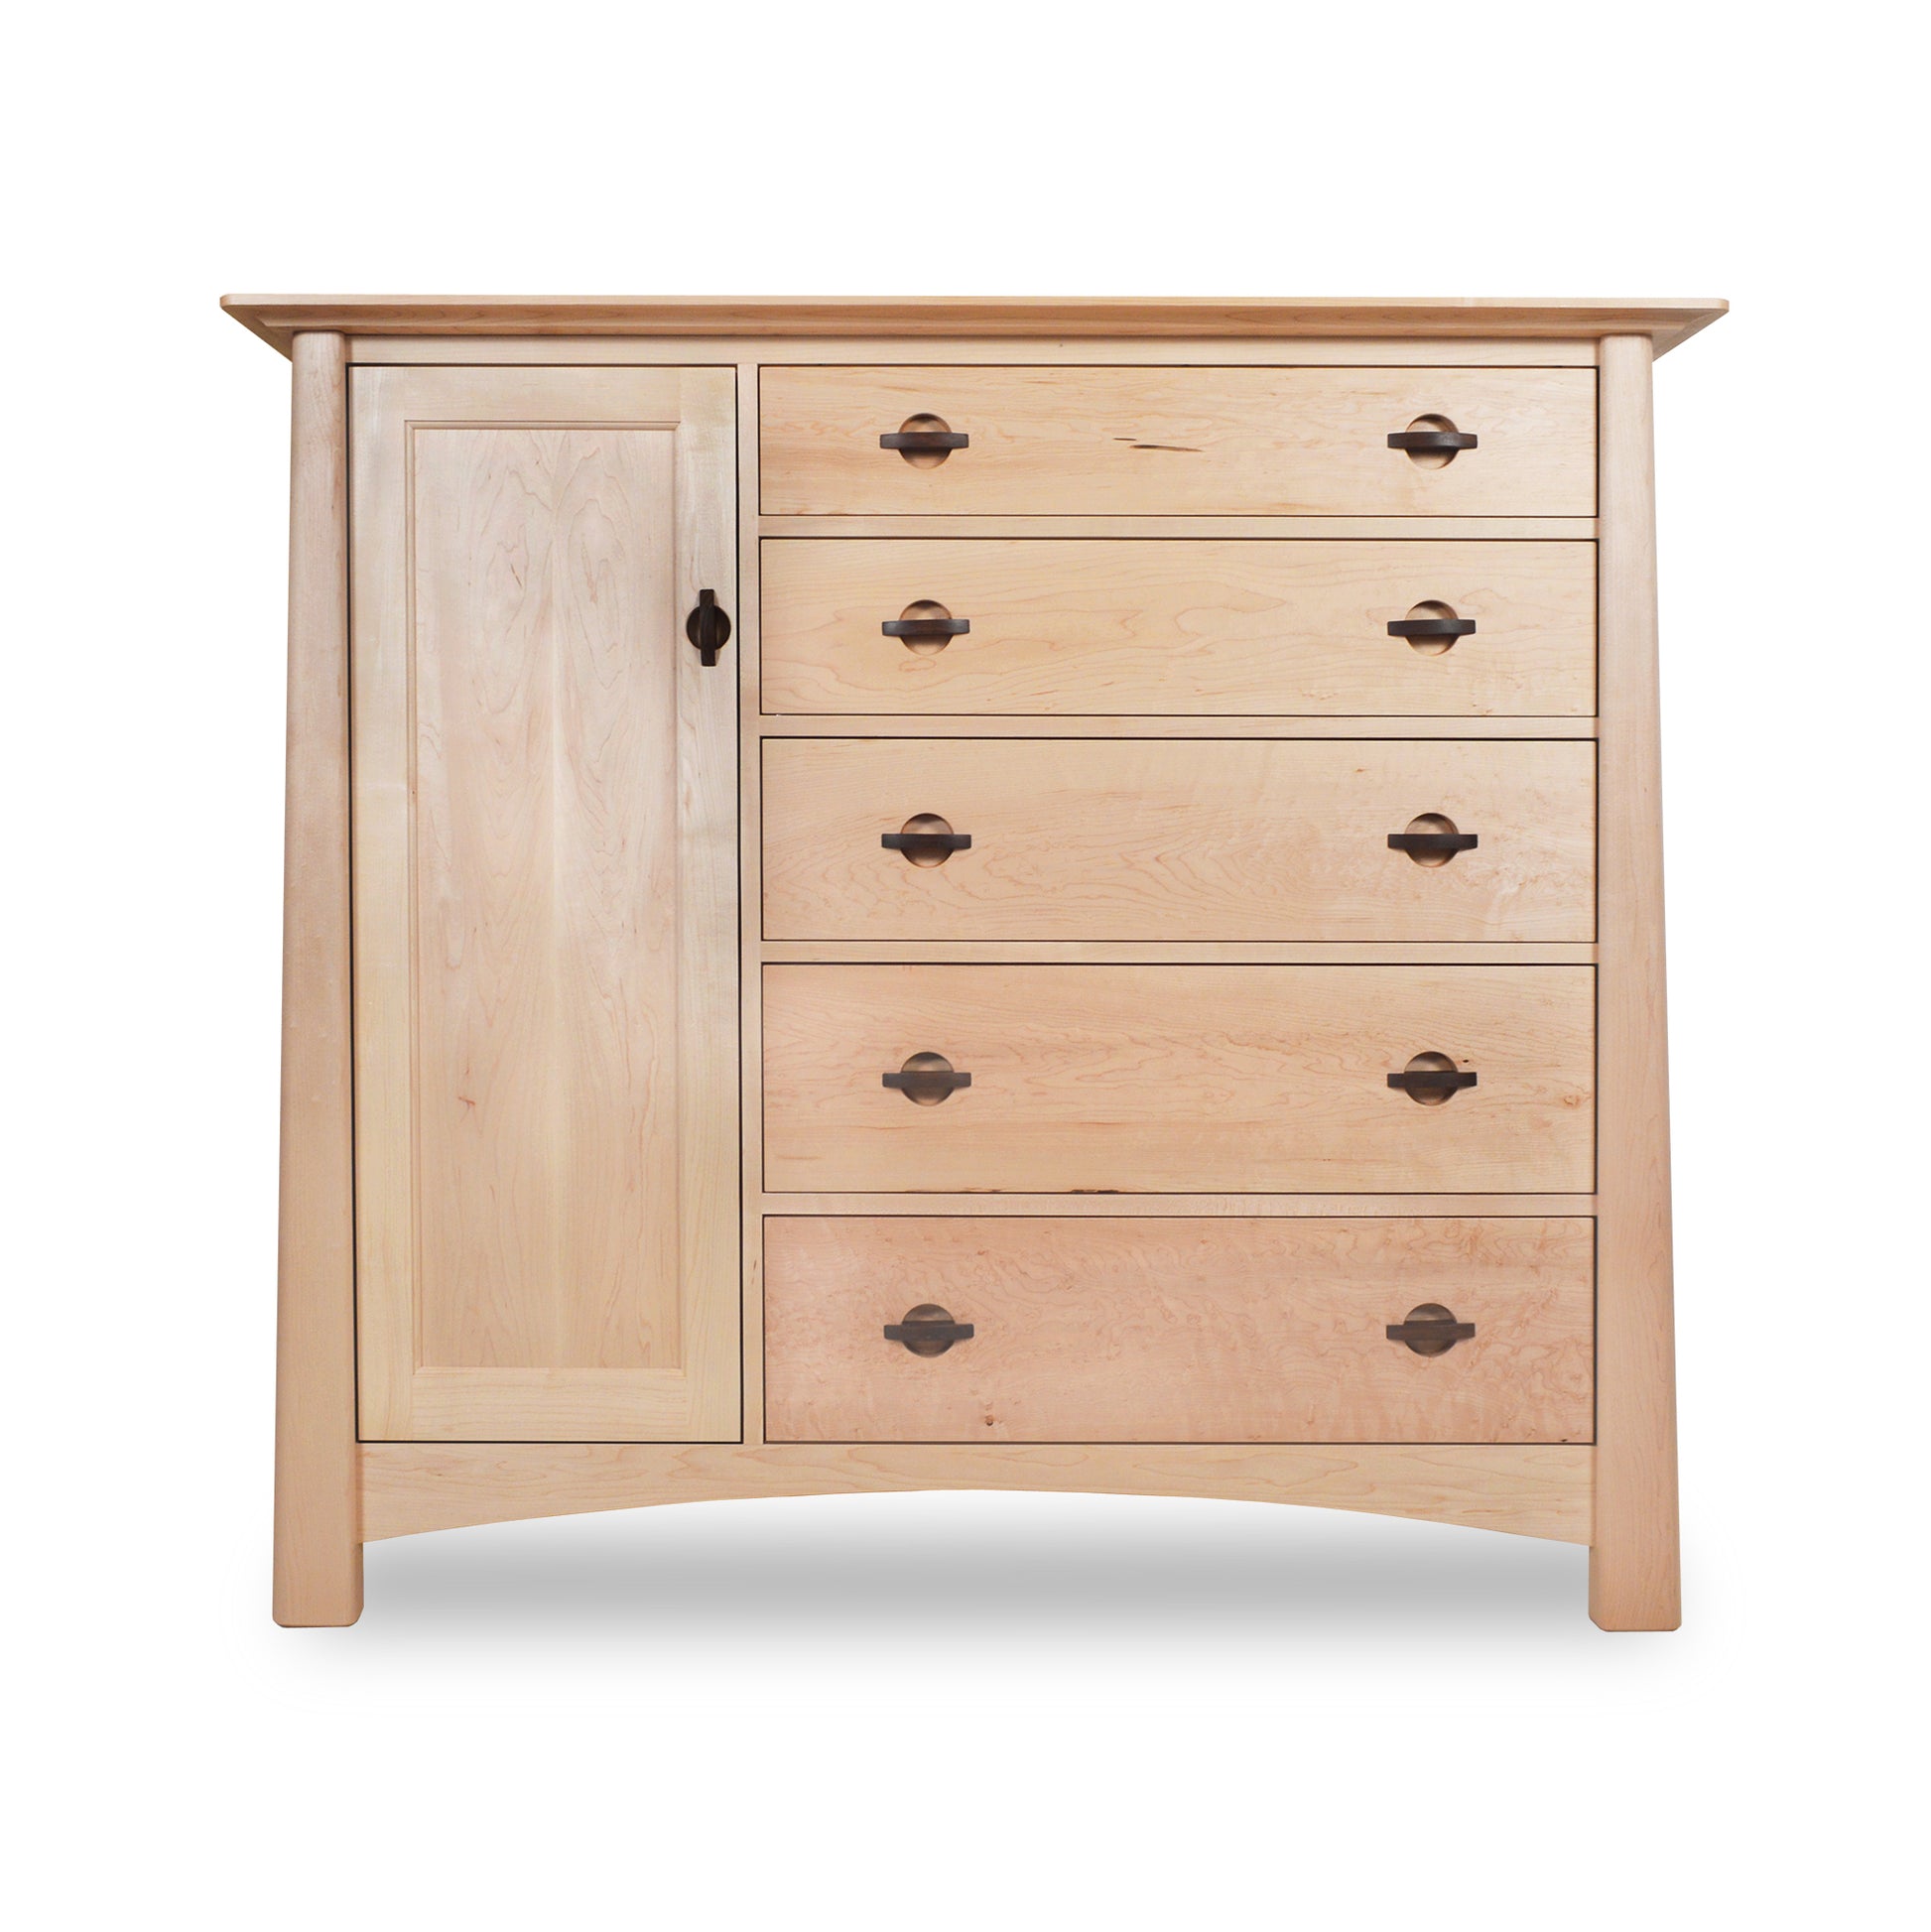 A Cherry Moon Gent's Chest made of solid woods, featuring a cabinet door on the left side and six drawers with round handles on the right, isolated on a white background by Maple Corner Woodworks.